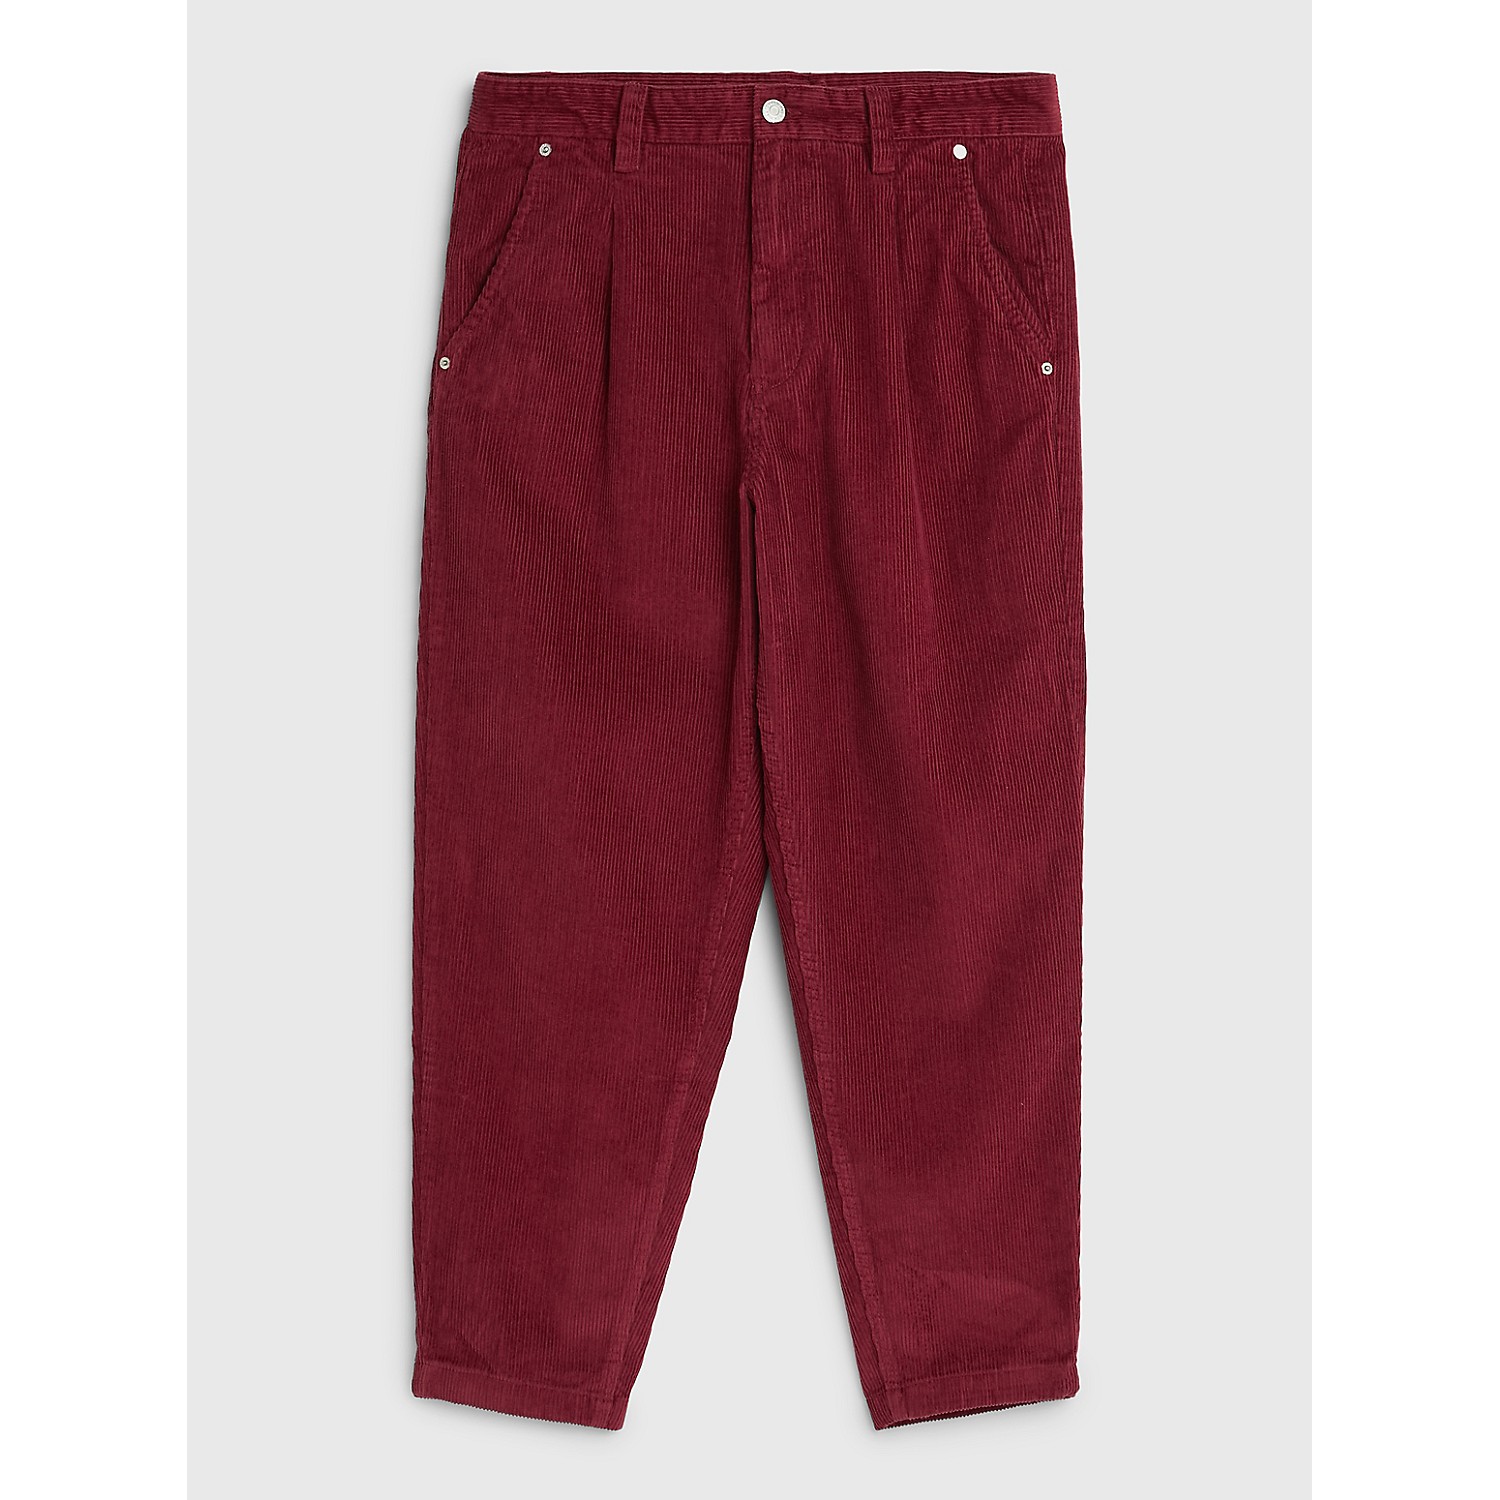 TOMMY HILFIGER Baggy Fit Tapered Corduroy Chino